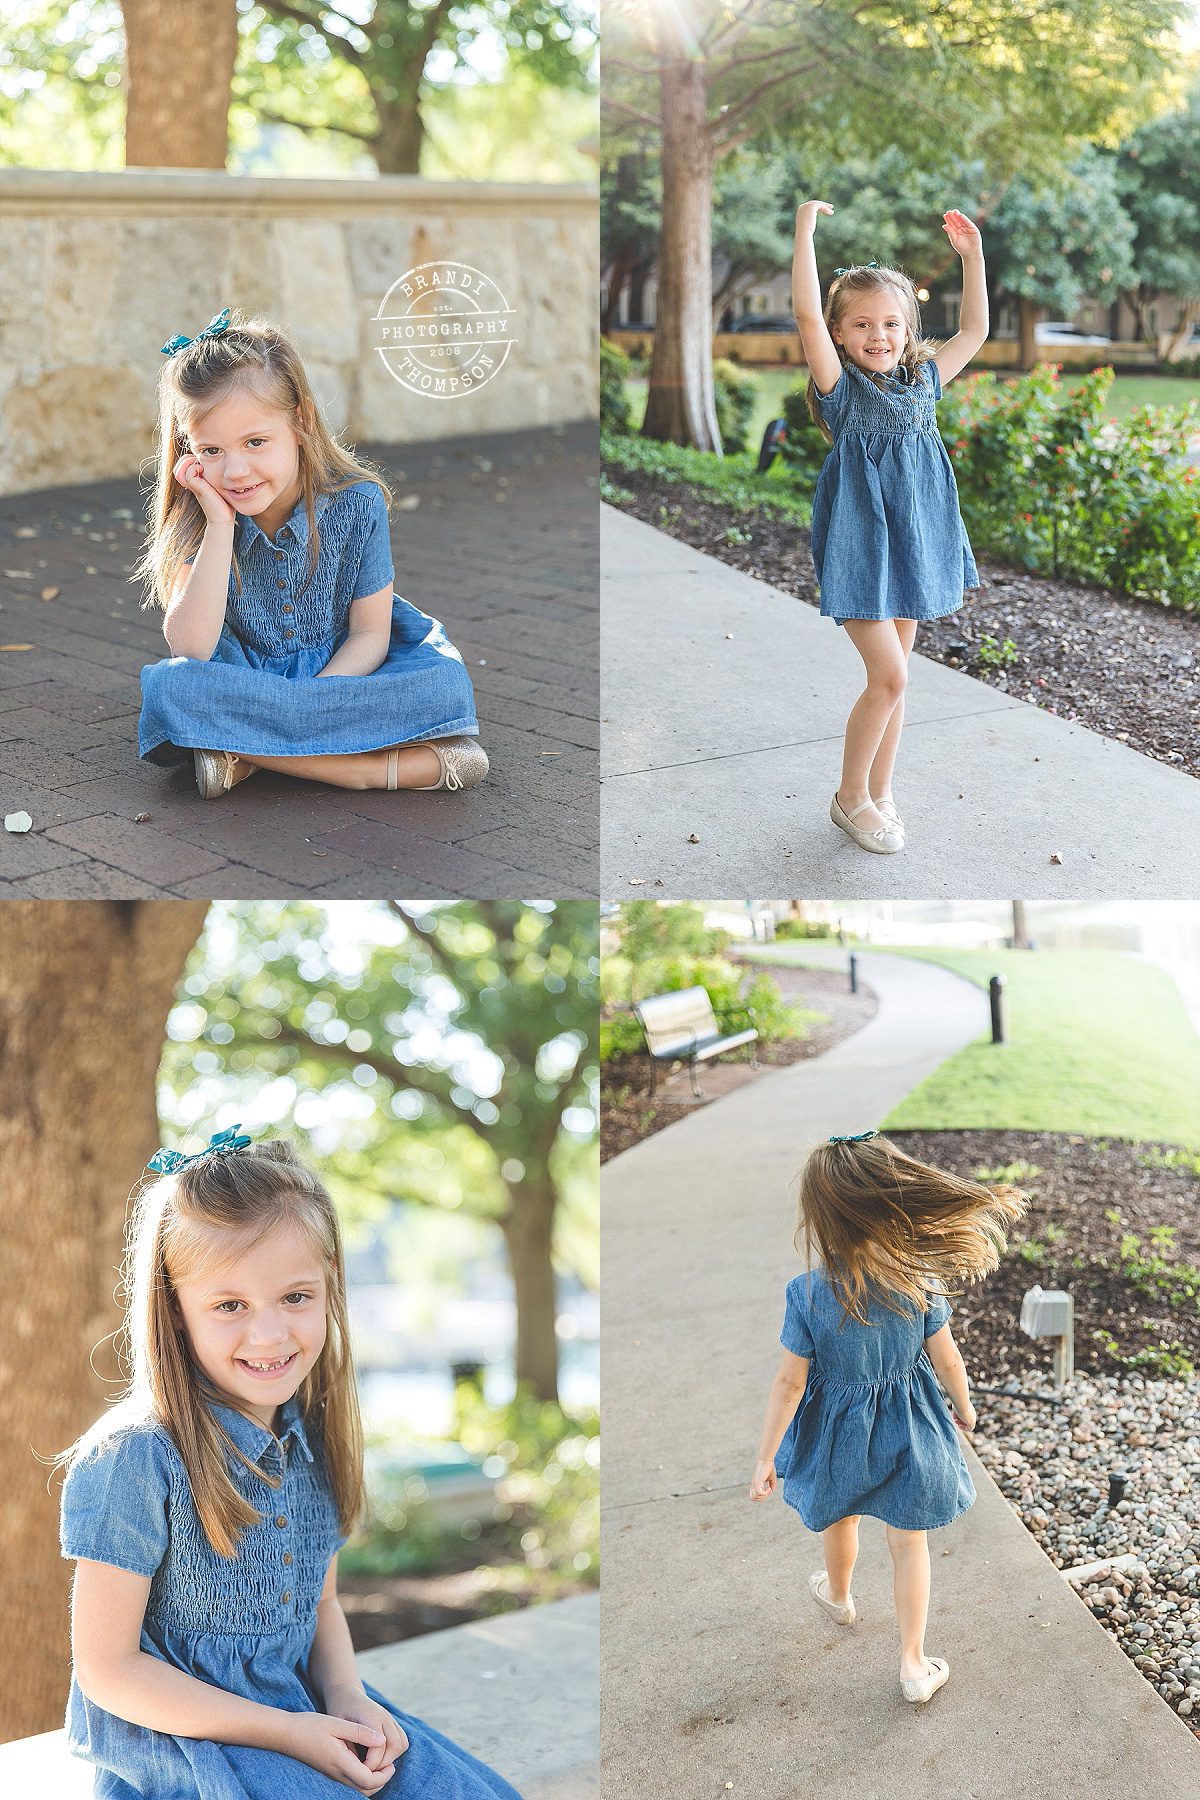 collage of outdoor photos of a five year old girl with long hair and light skin, in a mix of poses